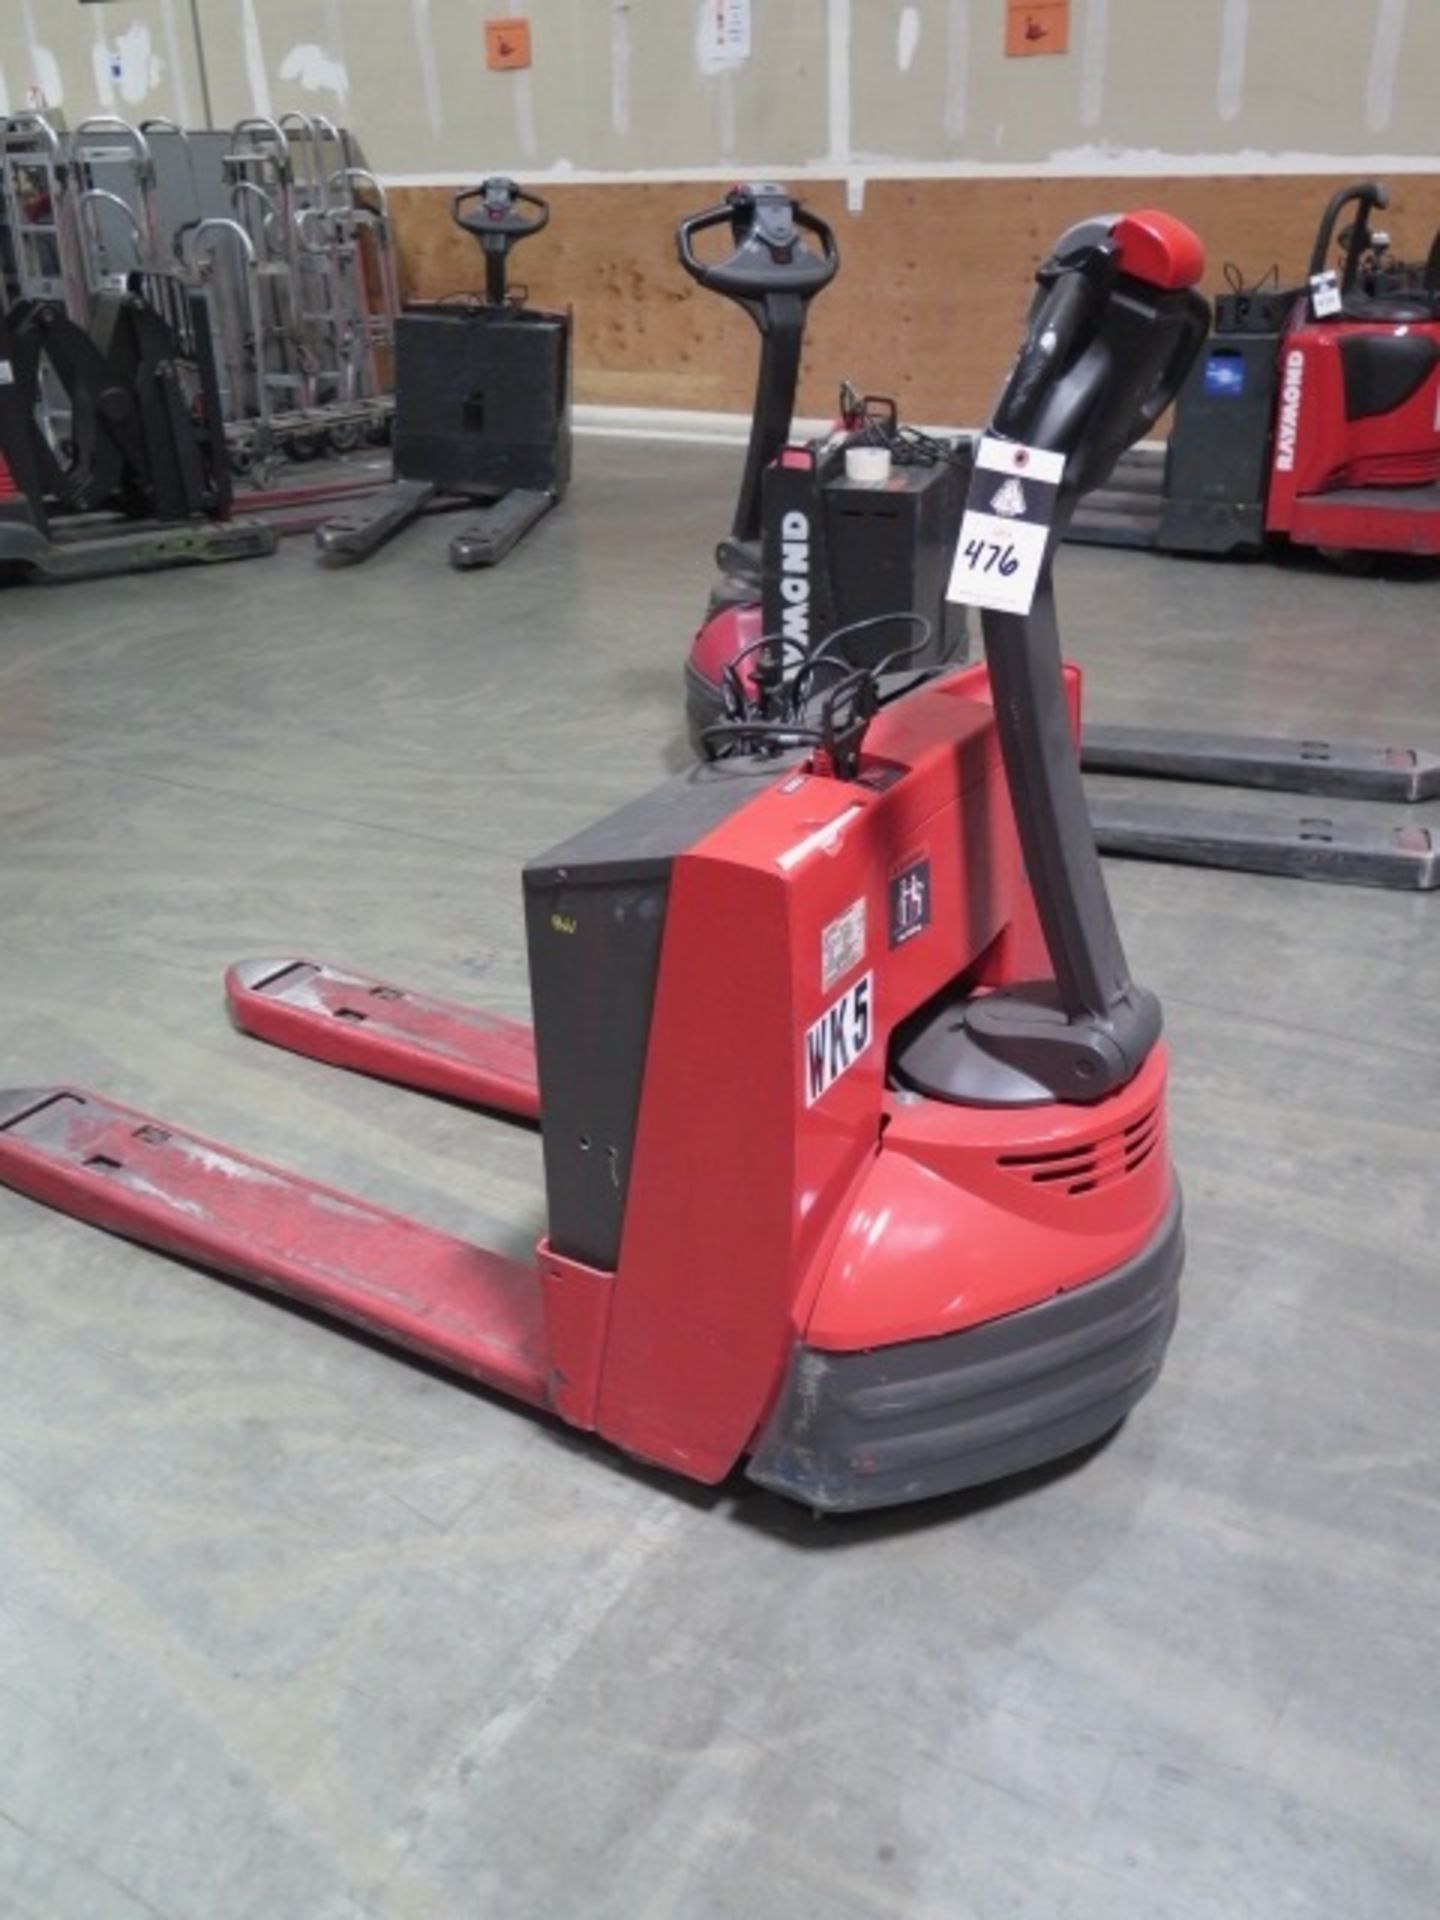 2015 Raymond Pallet Truck Model 102T-F45L Electric Pallet Truck, S/N 102-15-3520 | Rig Fee: $100 - Image 2 of 9